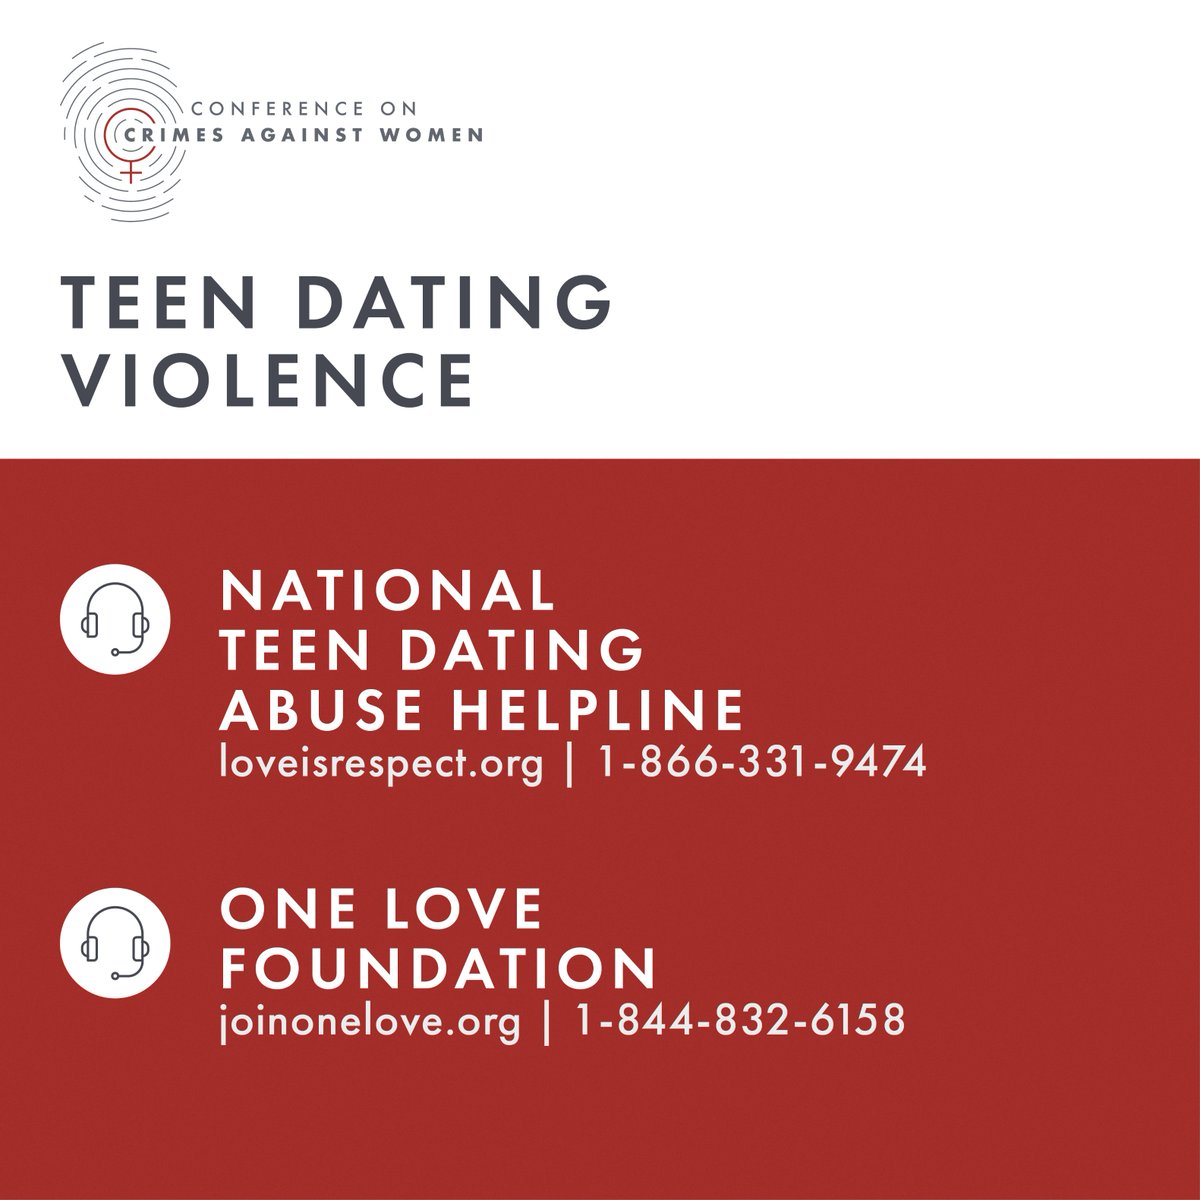 Each February during Teen Dating Violence Awareness Month (#TDVAM), we focus on advocating and educating our young adults to stop #DatingAbuse before it starts. If you would like resources to support a #teen in your community, visit:

🔺 @LoveIsRespect
🔺 @Join1Love